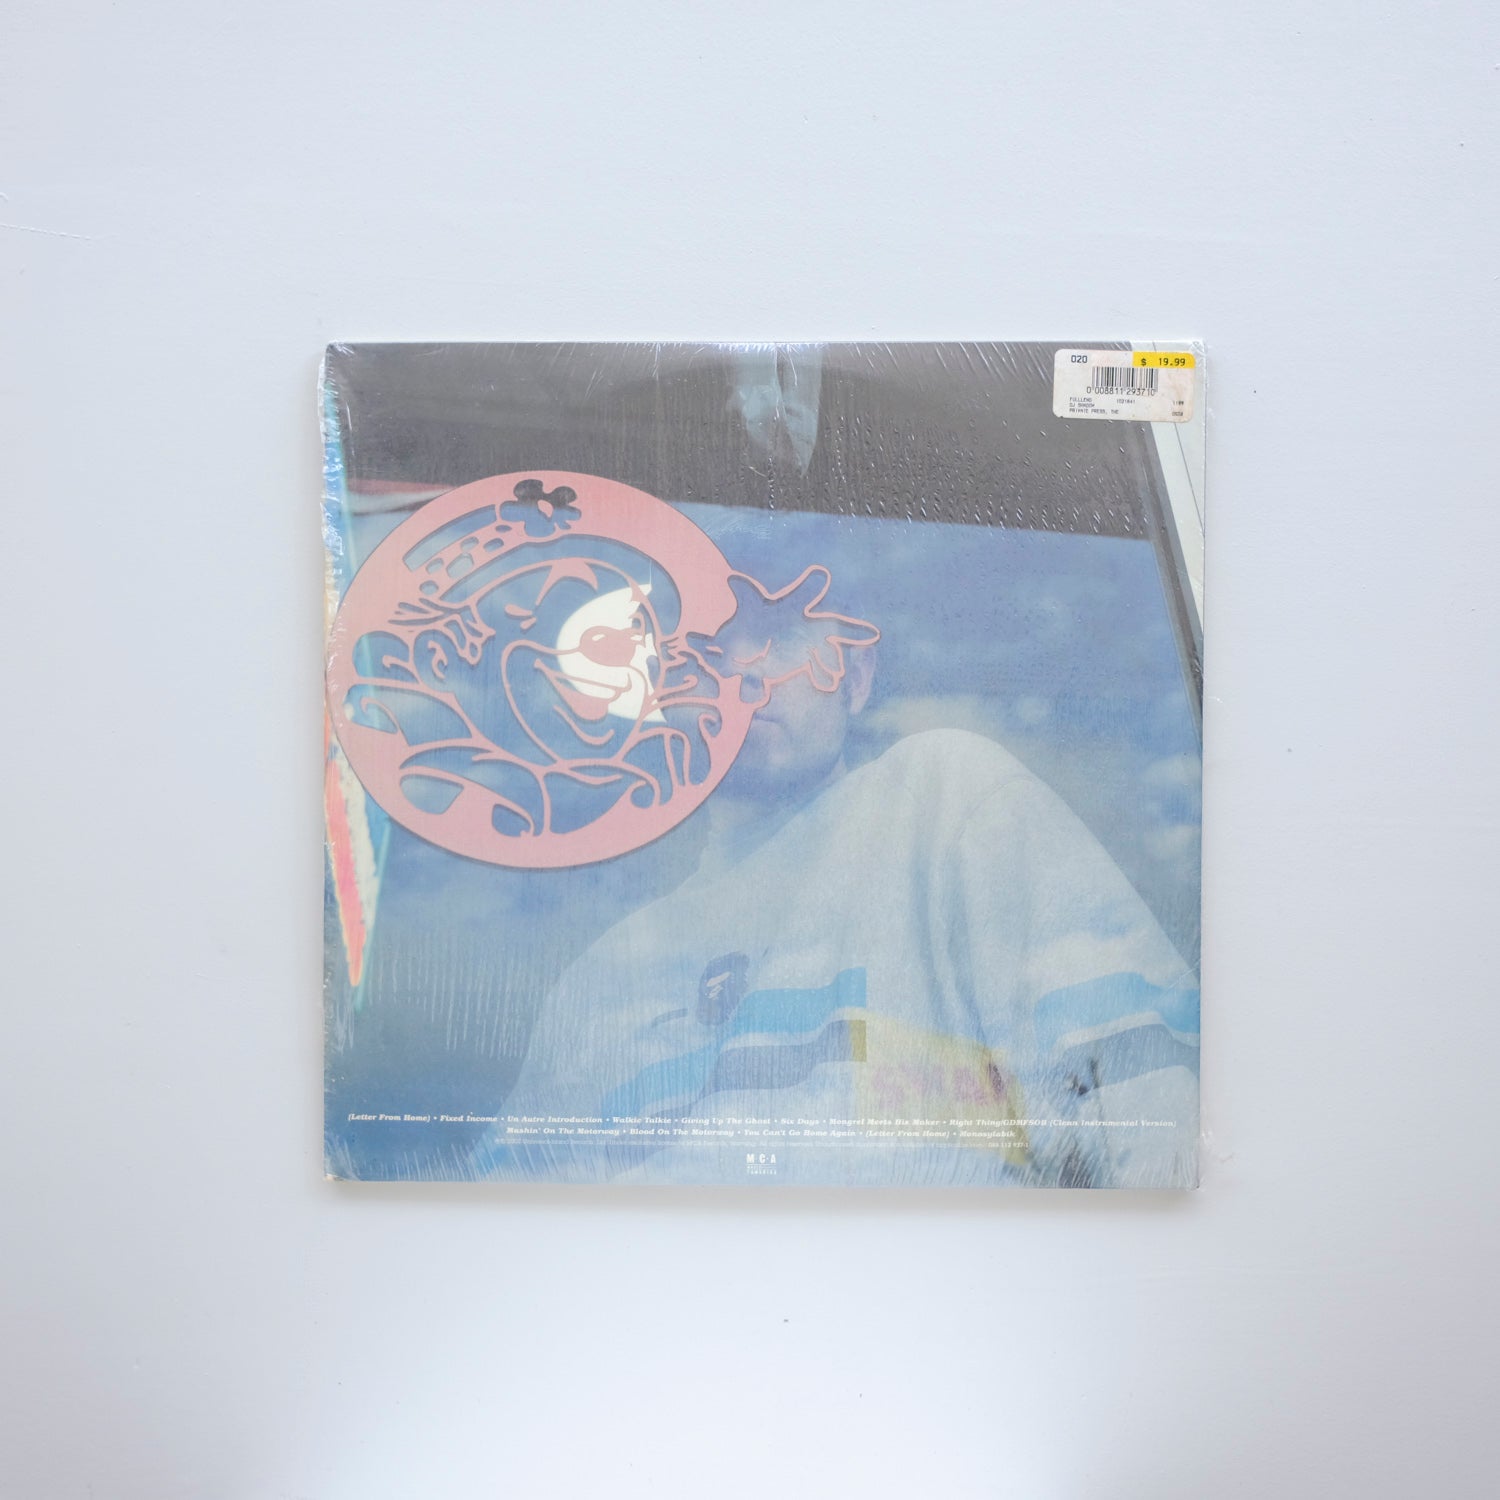 DJ Shadow - The Private Press [sealed]